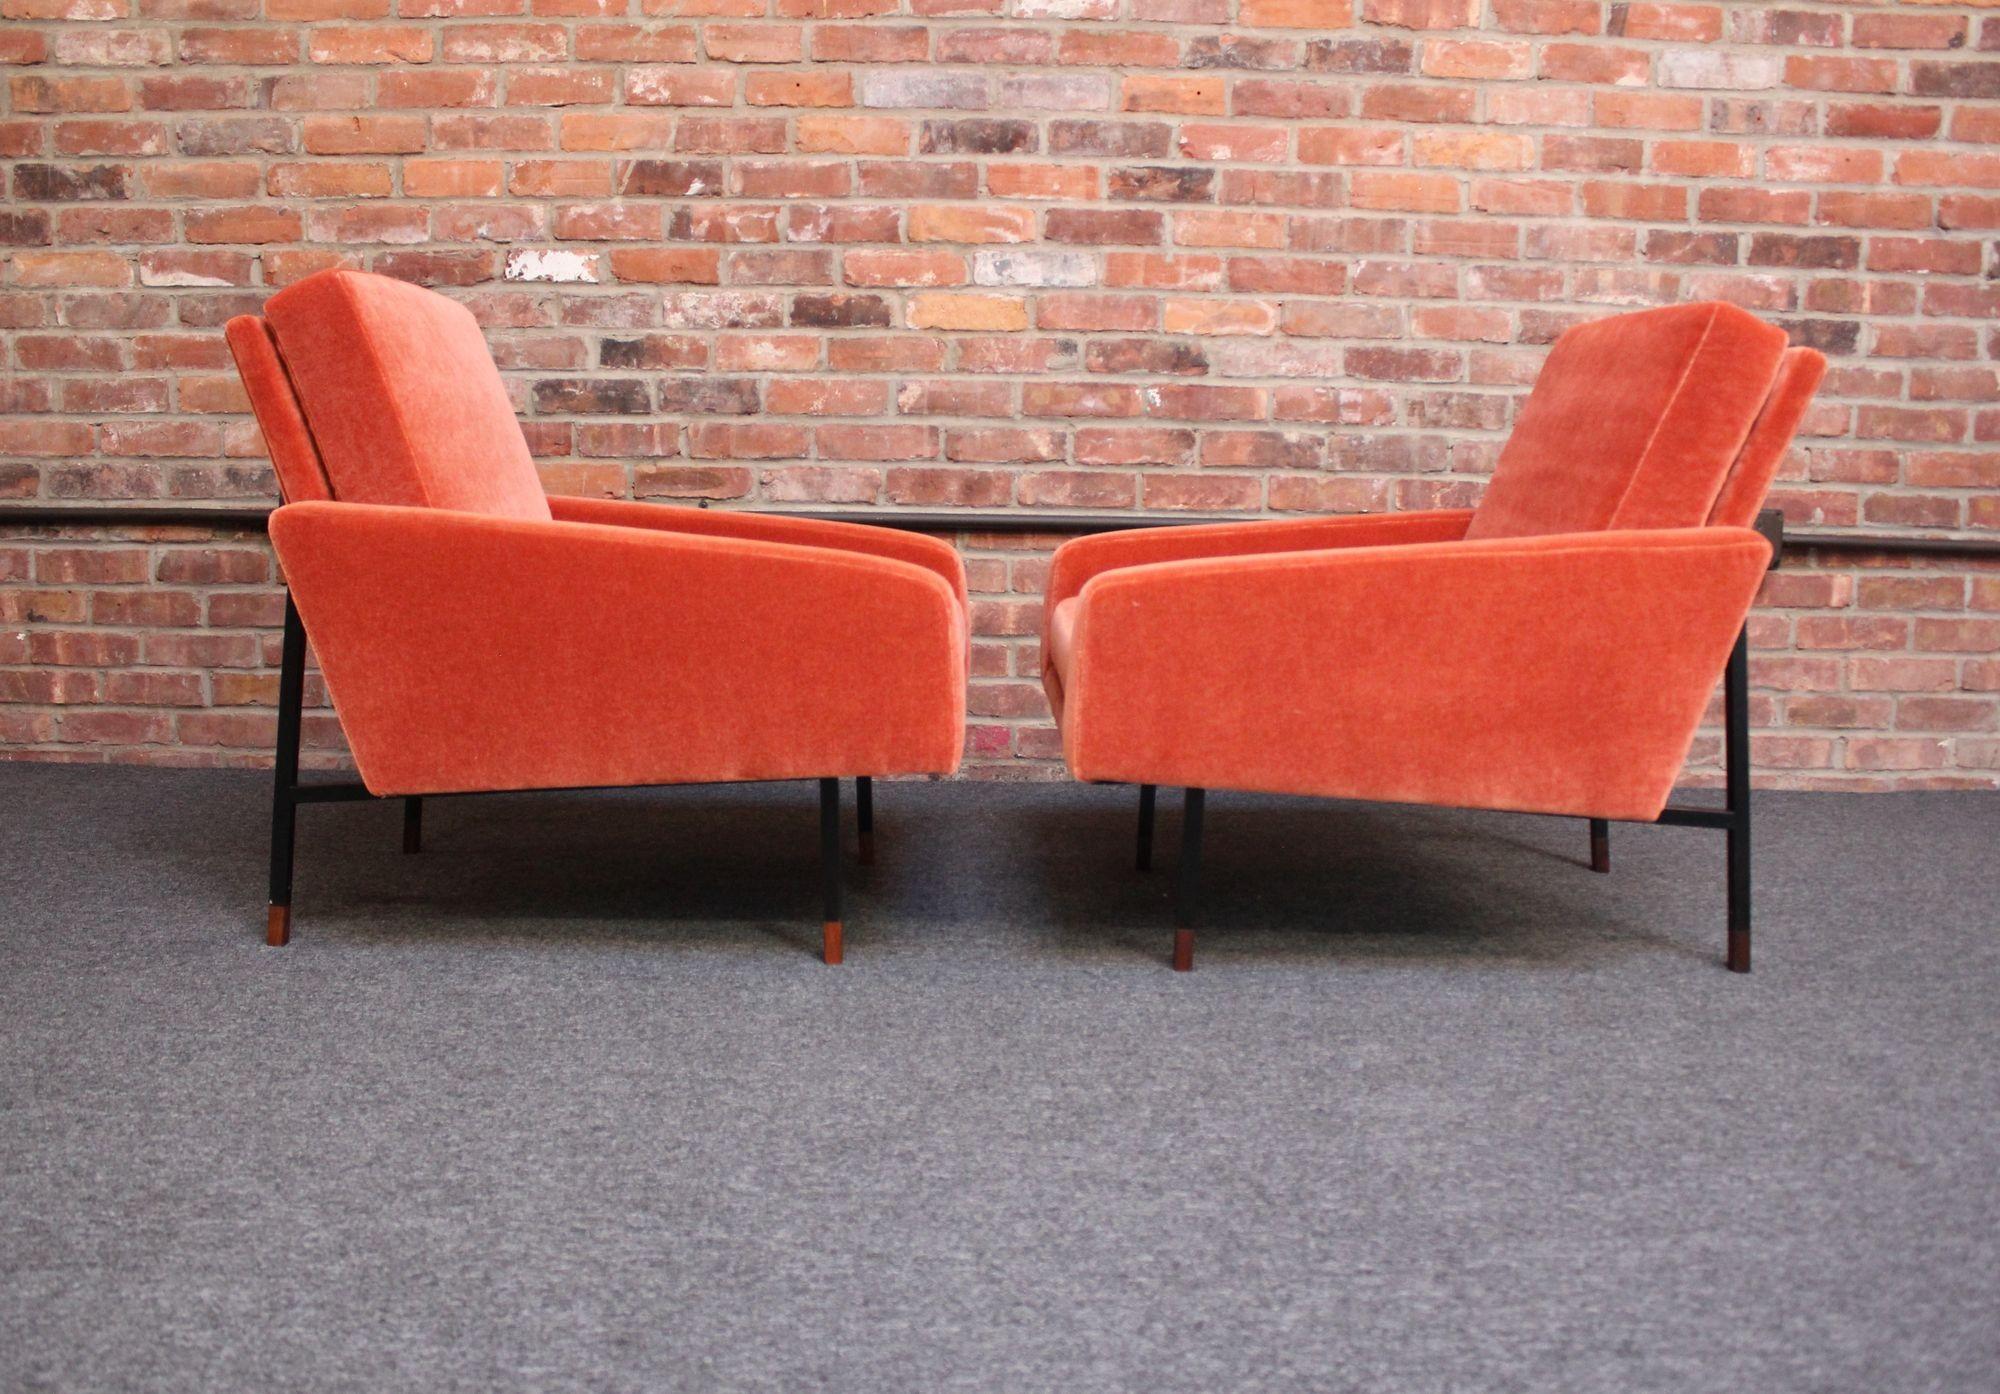 Mid-20th Century Pair of Italian Modernist Metal and Mohair Lounge Chairs by Campo and Graffi For Sale